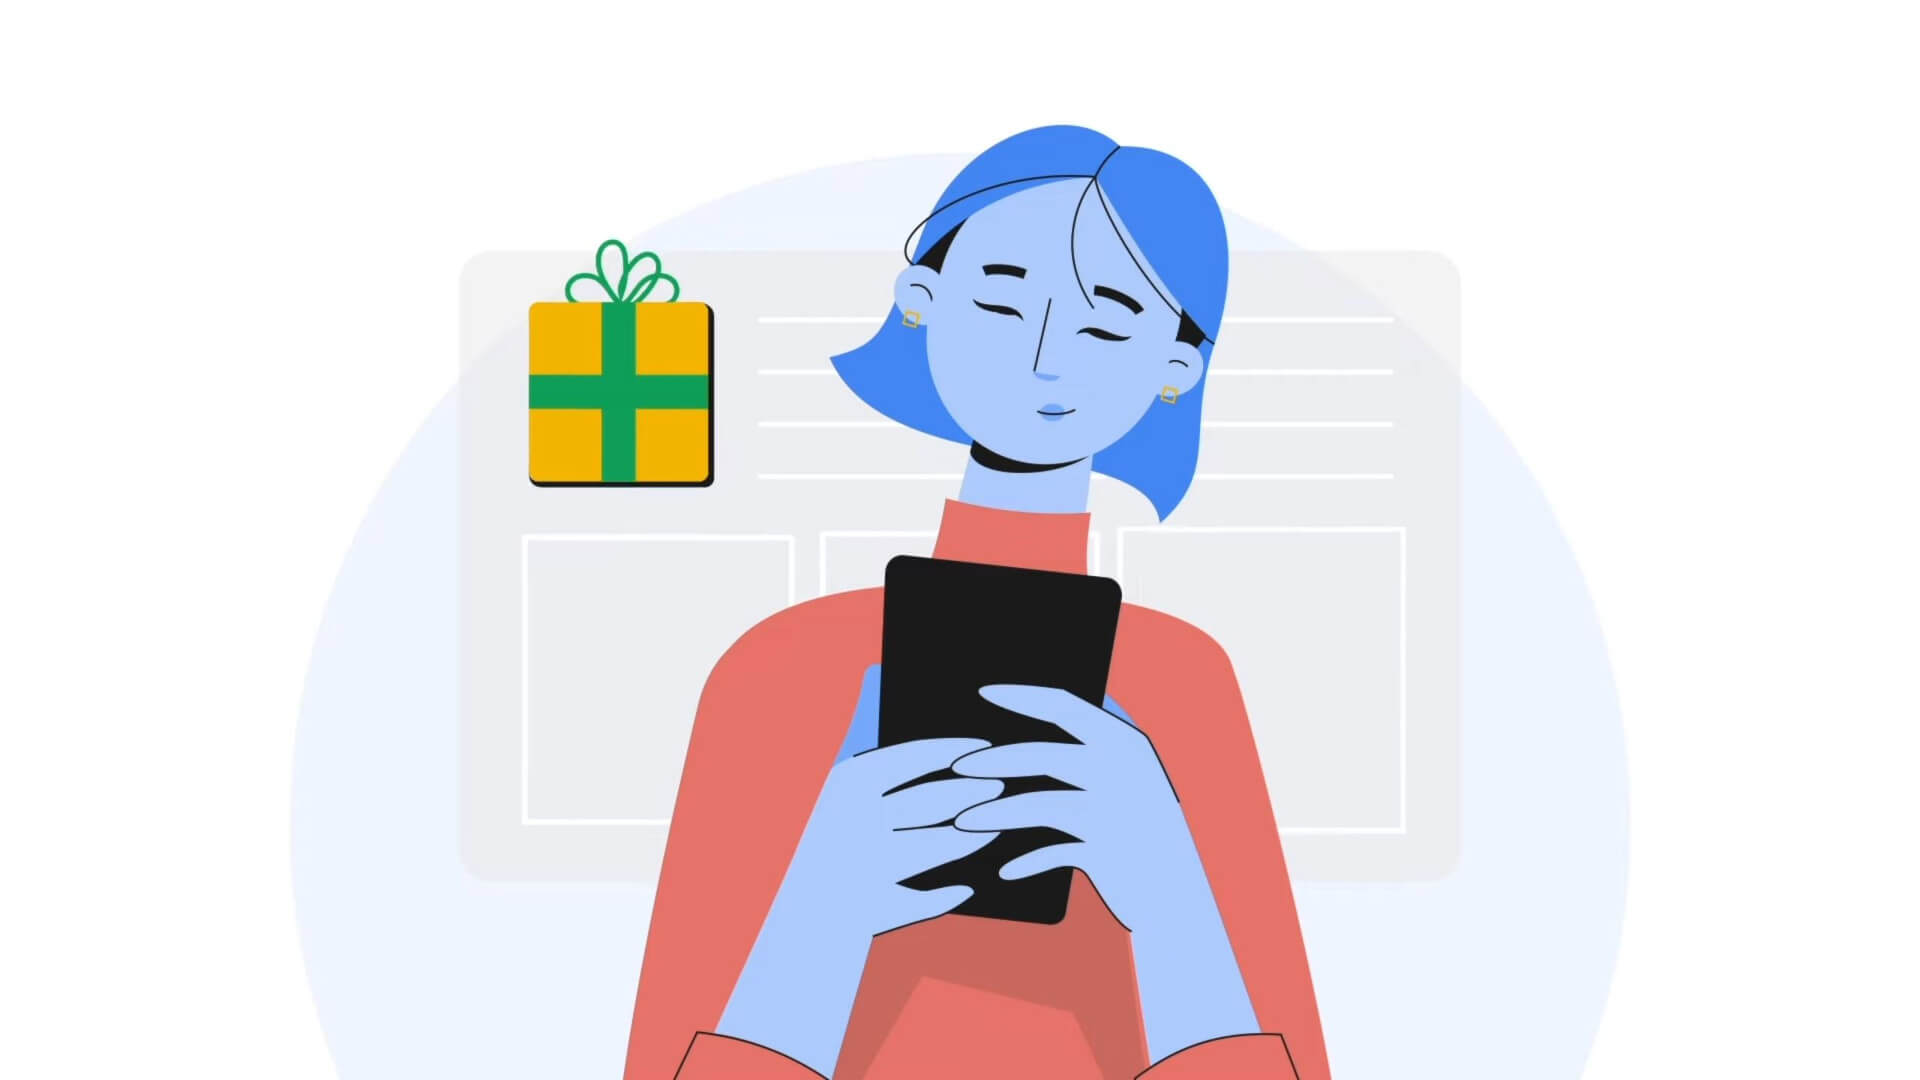 An illustrated image of a woman using her Android phone to look things up on Google, intended to represent CyanogenMod being told to take its app down from the Play Store